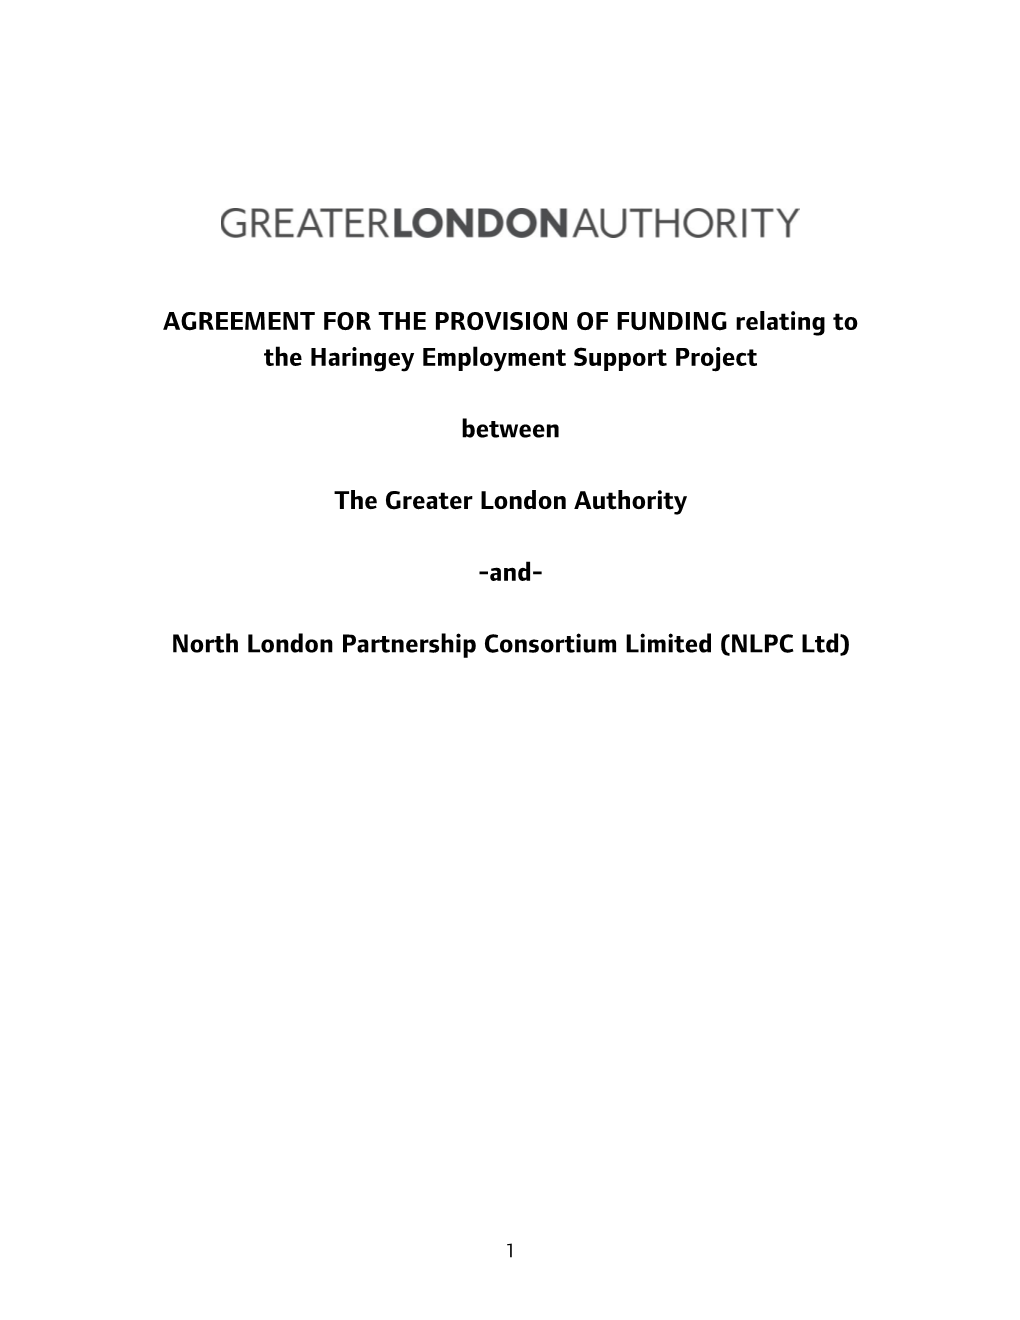 AGREEMENT for the PROVISION of FUNDING Relating to the Haringey Employment Support Project